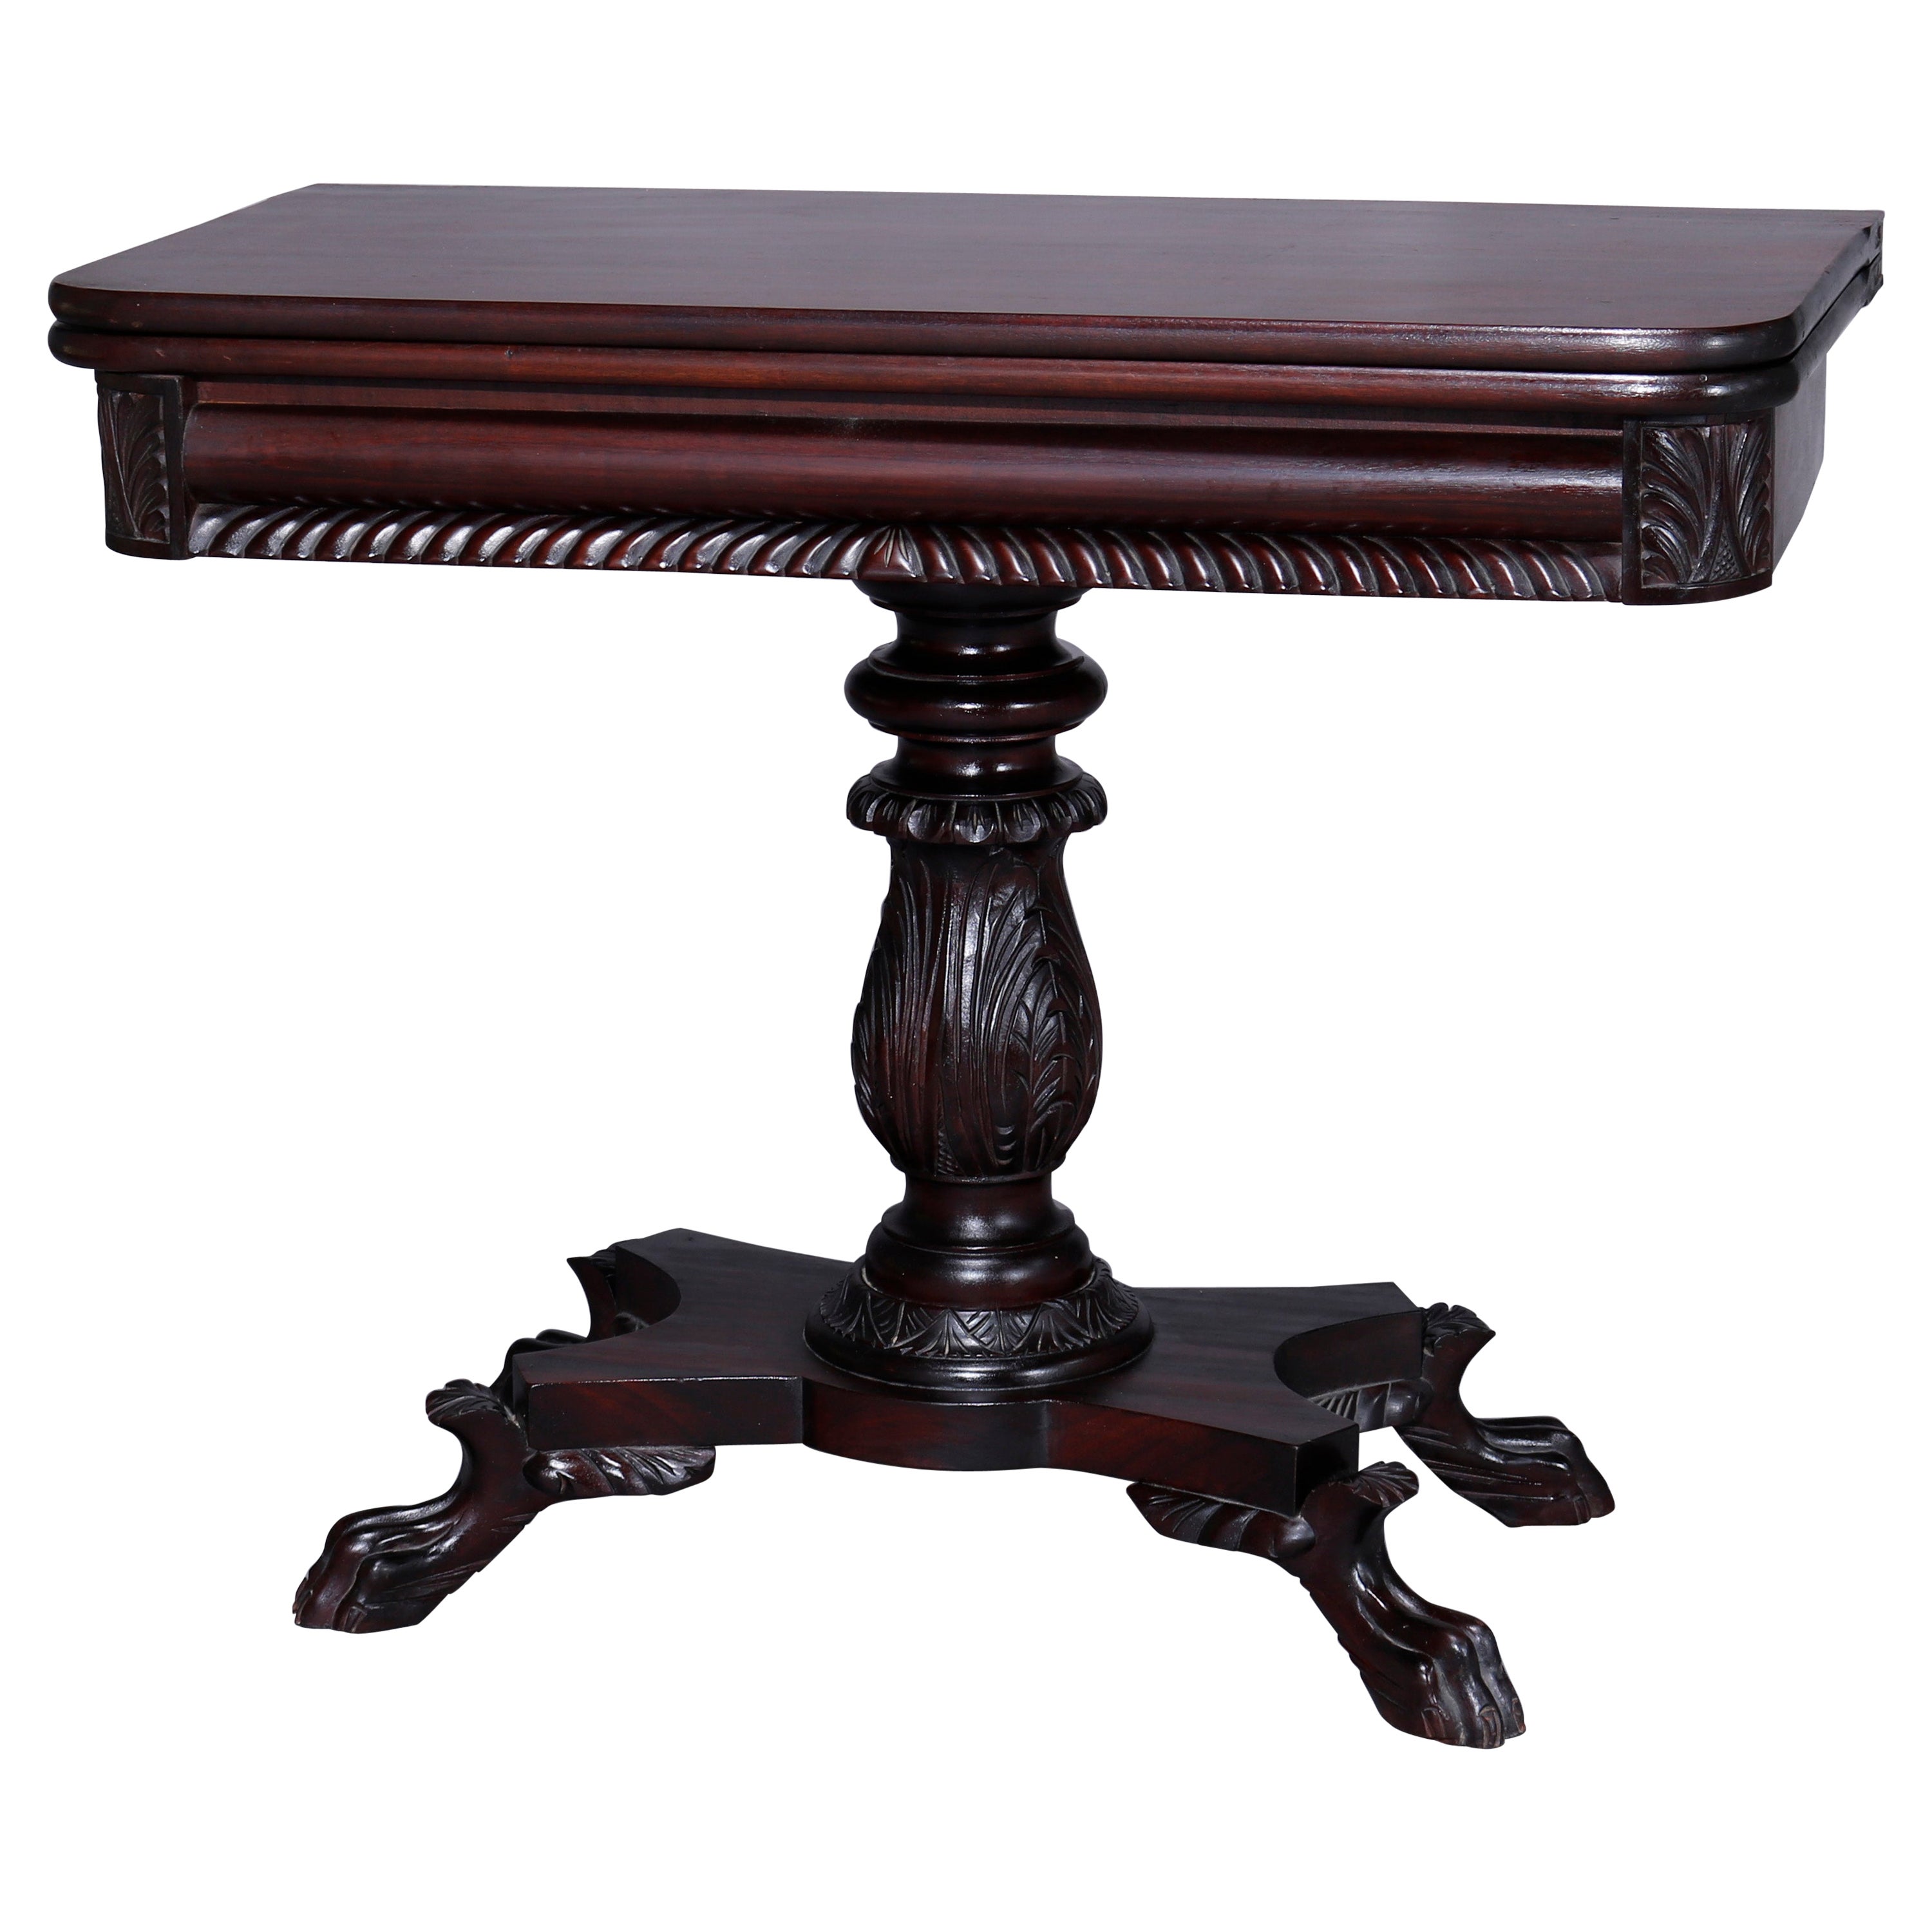 Antique American Empire Classical Carved Mahogany Claw Foot Card Table c1840